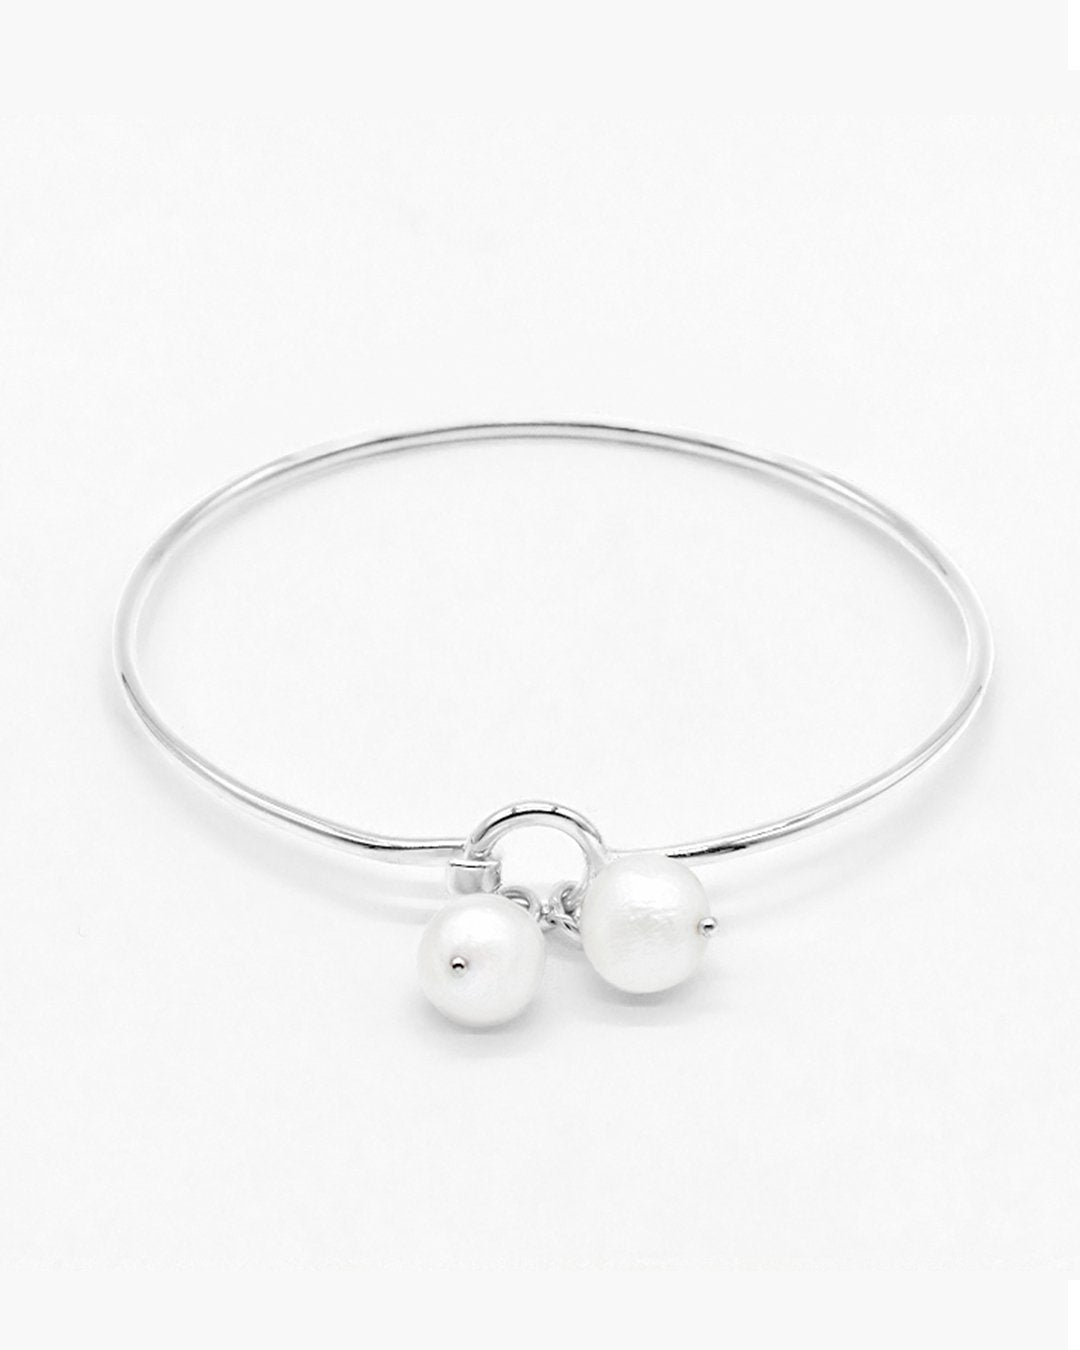 PEARL BANGLE - STERLING SILVER